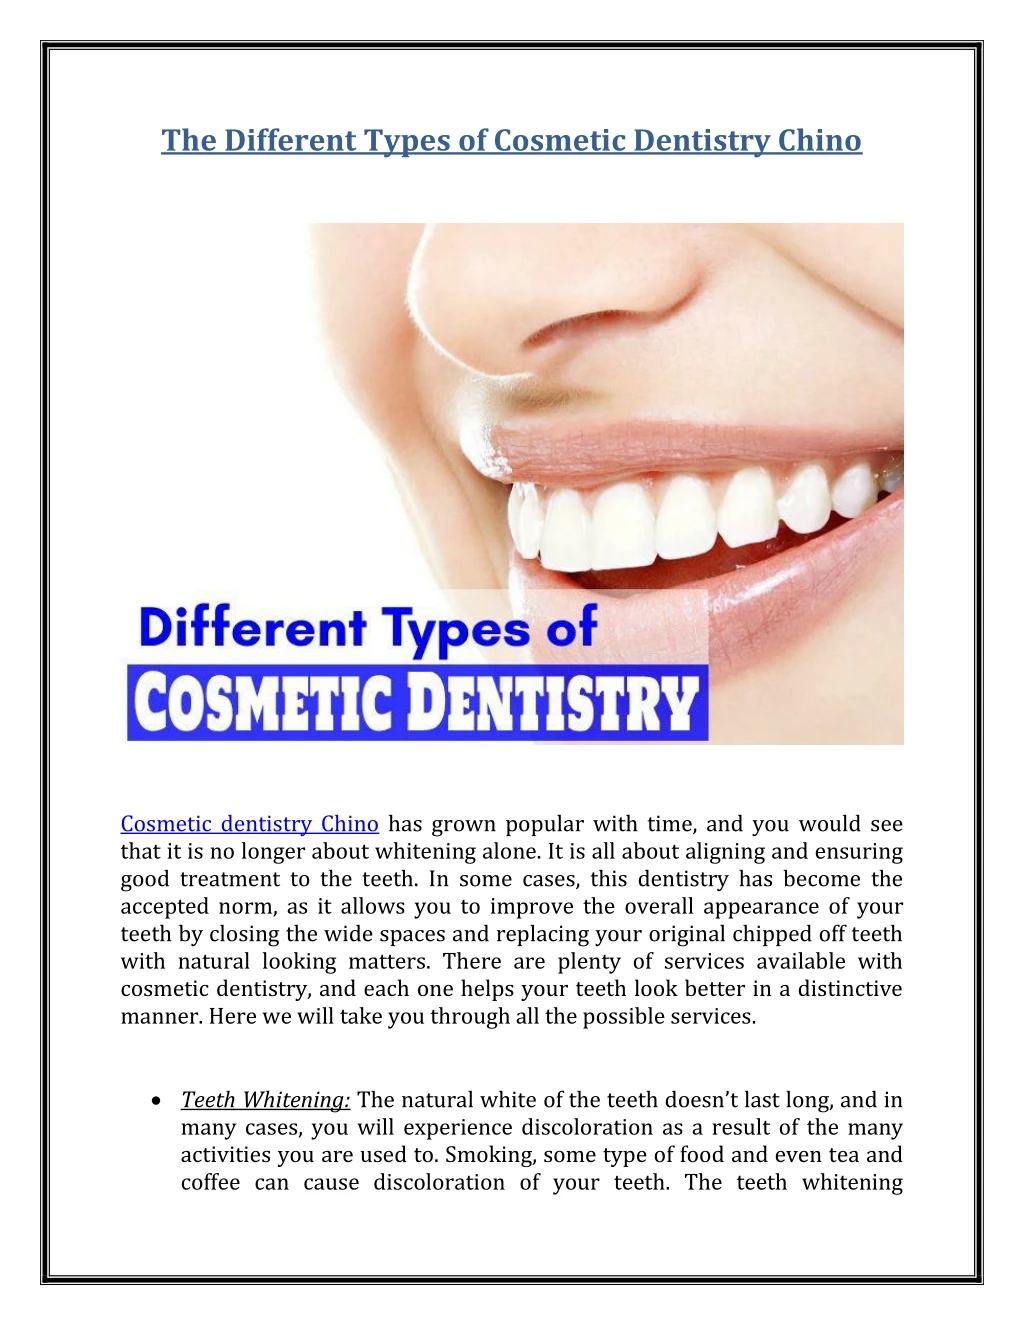 the different types of cosmetic dentistry chino